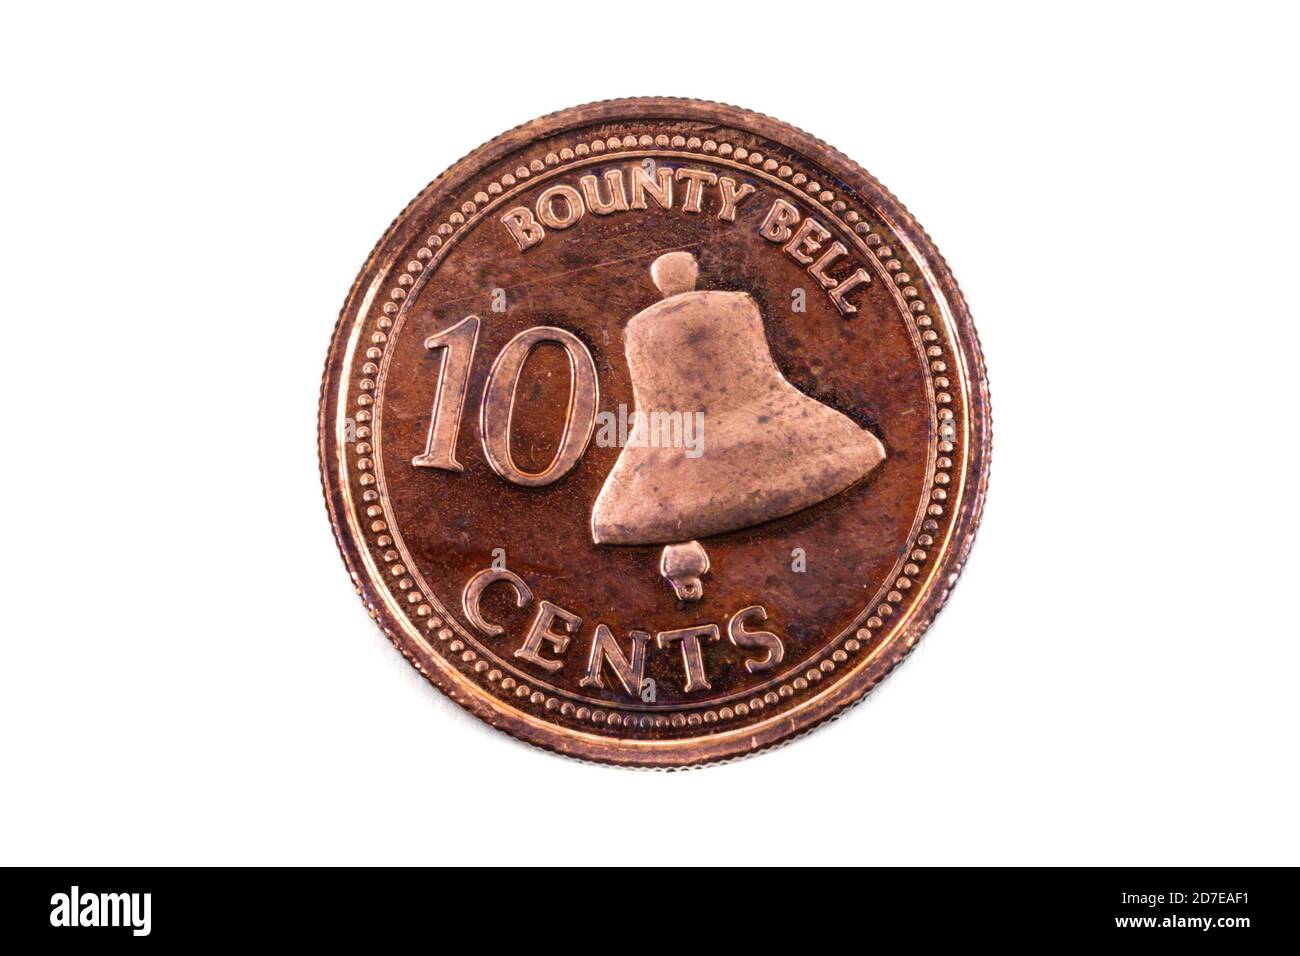 A close up view of a Ten Cents coin from the Pitcairn Islands Stock Photo